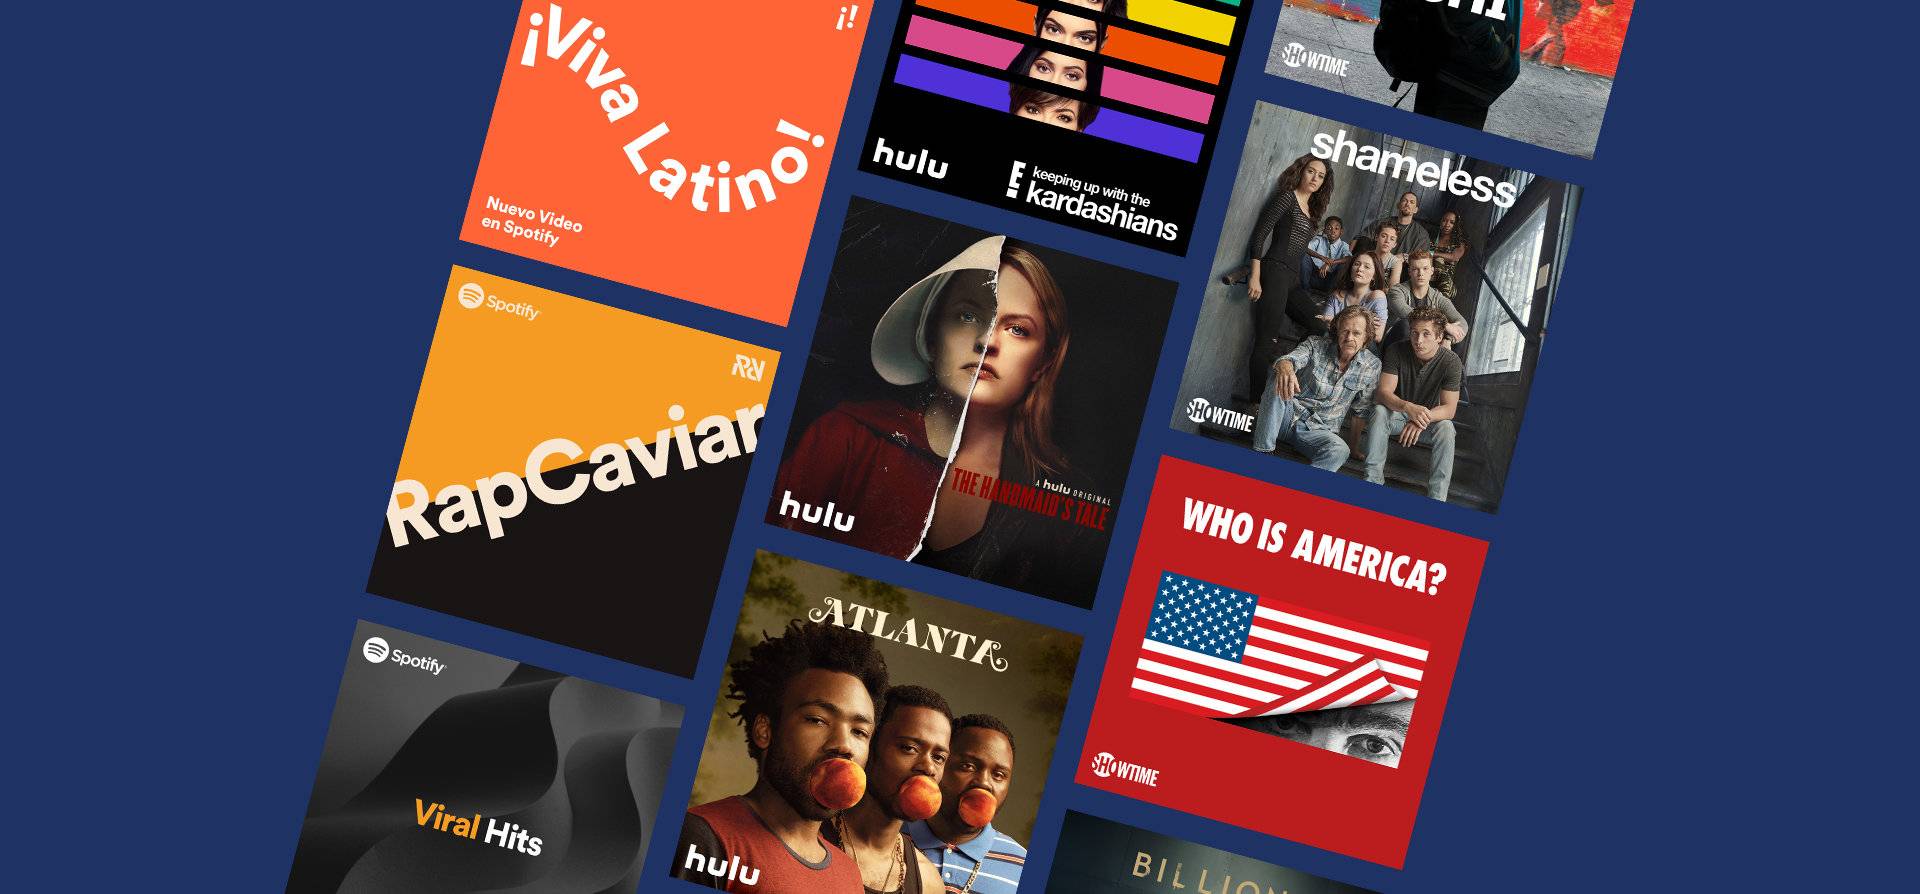 Showtime For Free With Spotify Student